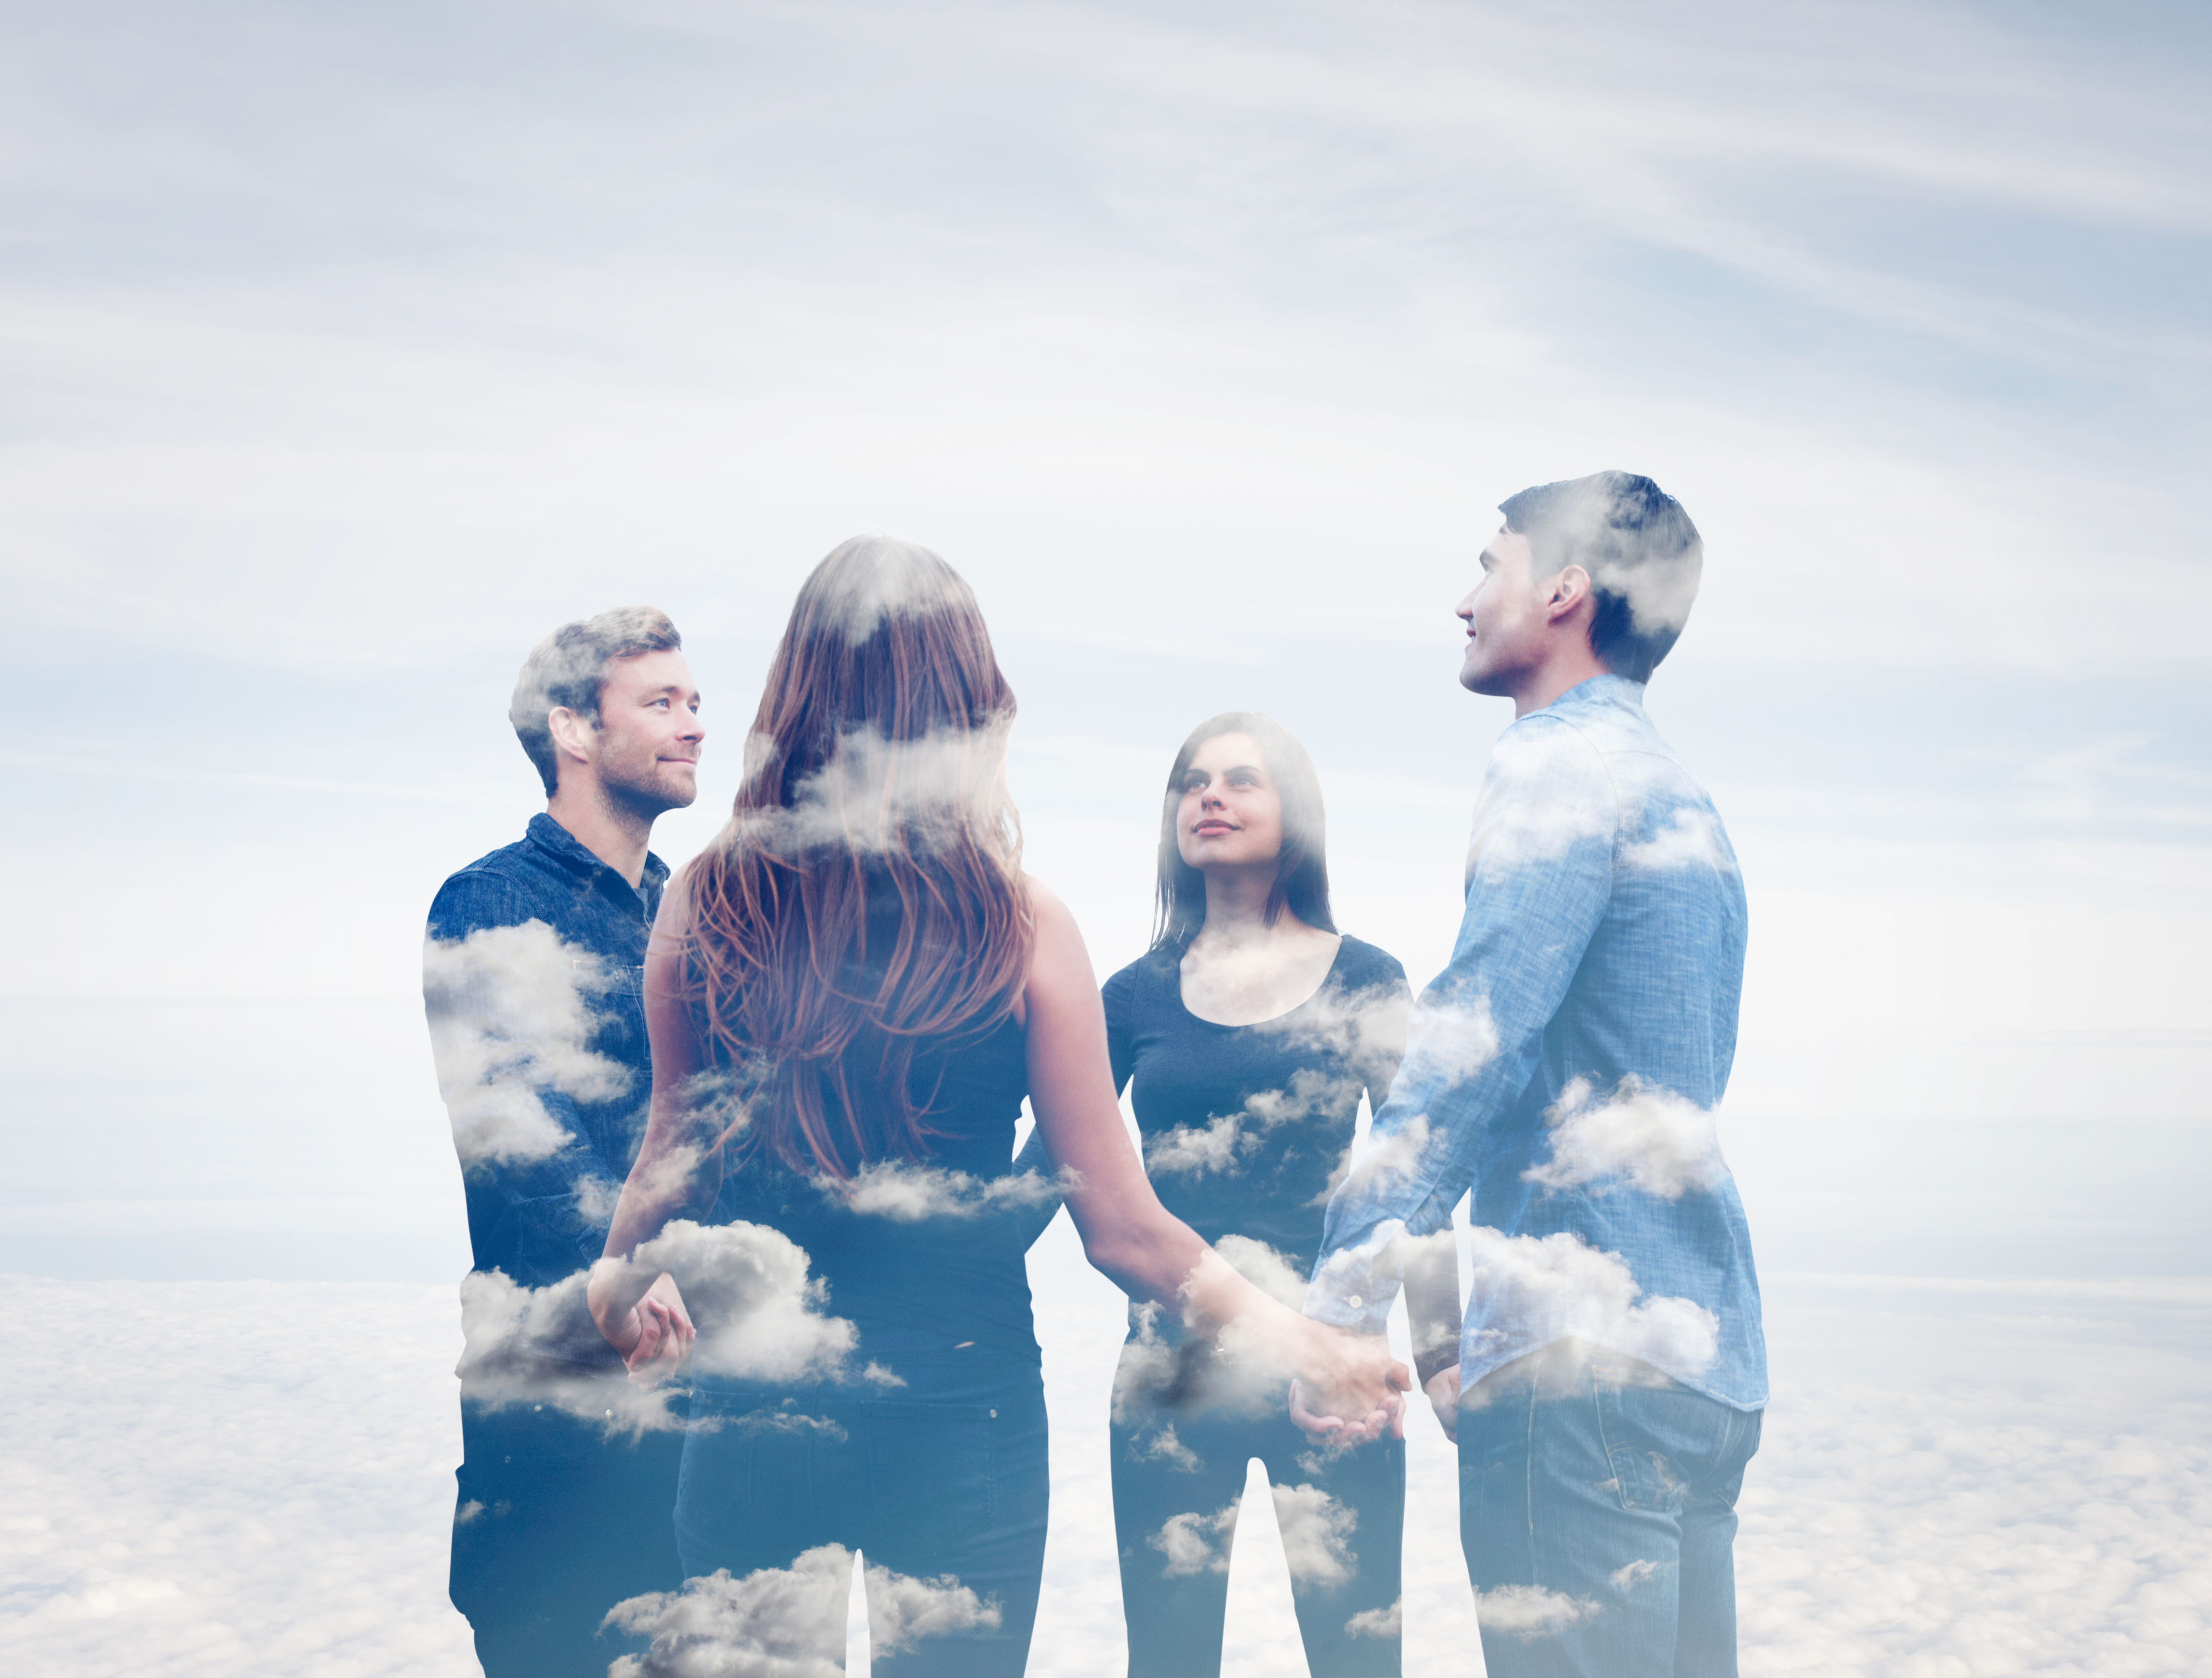 Four people stand in a circle holding hands, with a cloudy sky superimposed over them